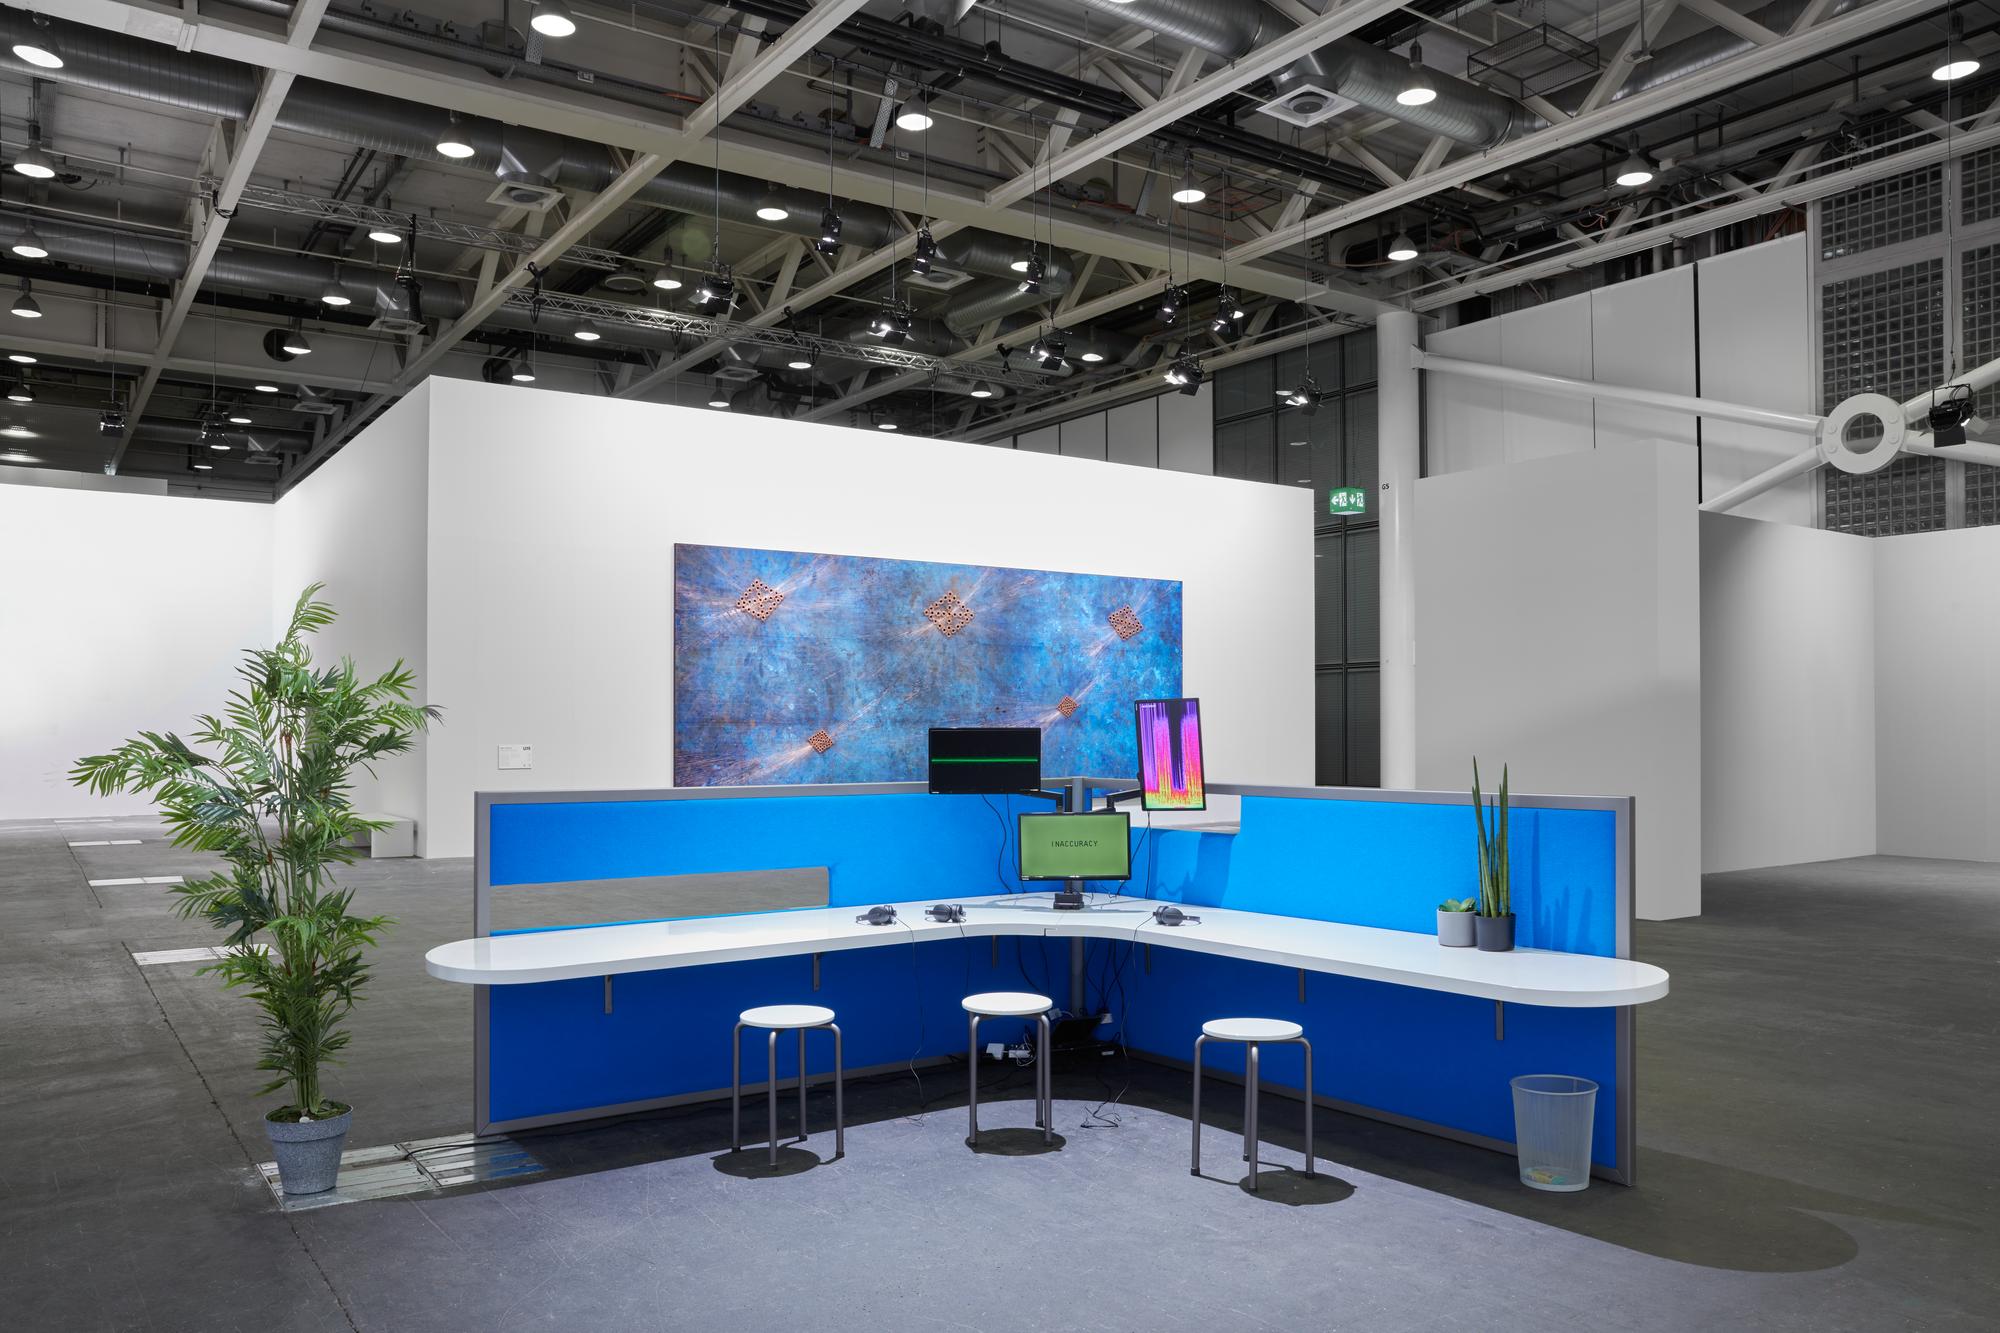 A view of Lawrence abu Hamdan's installation, of a blue office-space-like cordon that sections off a desk, monitors, and three stools. There is a spiky-leafed plant to the left side.